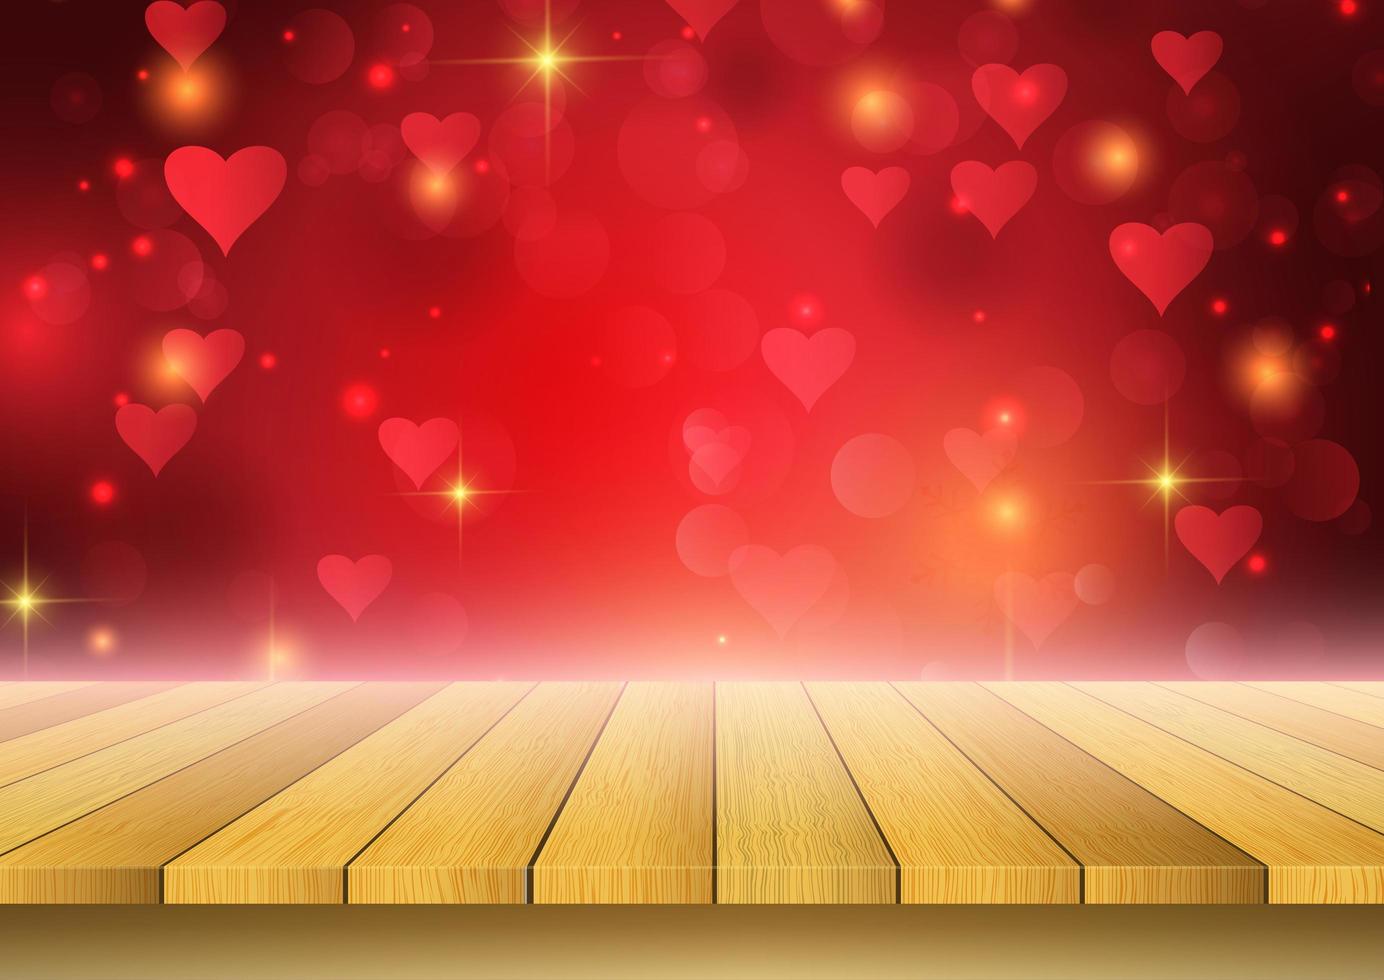 Valentine's Day background with wooden table looking out to hearts design vector